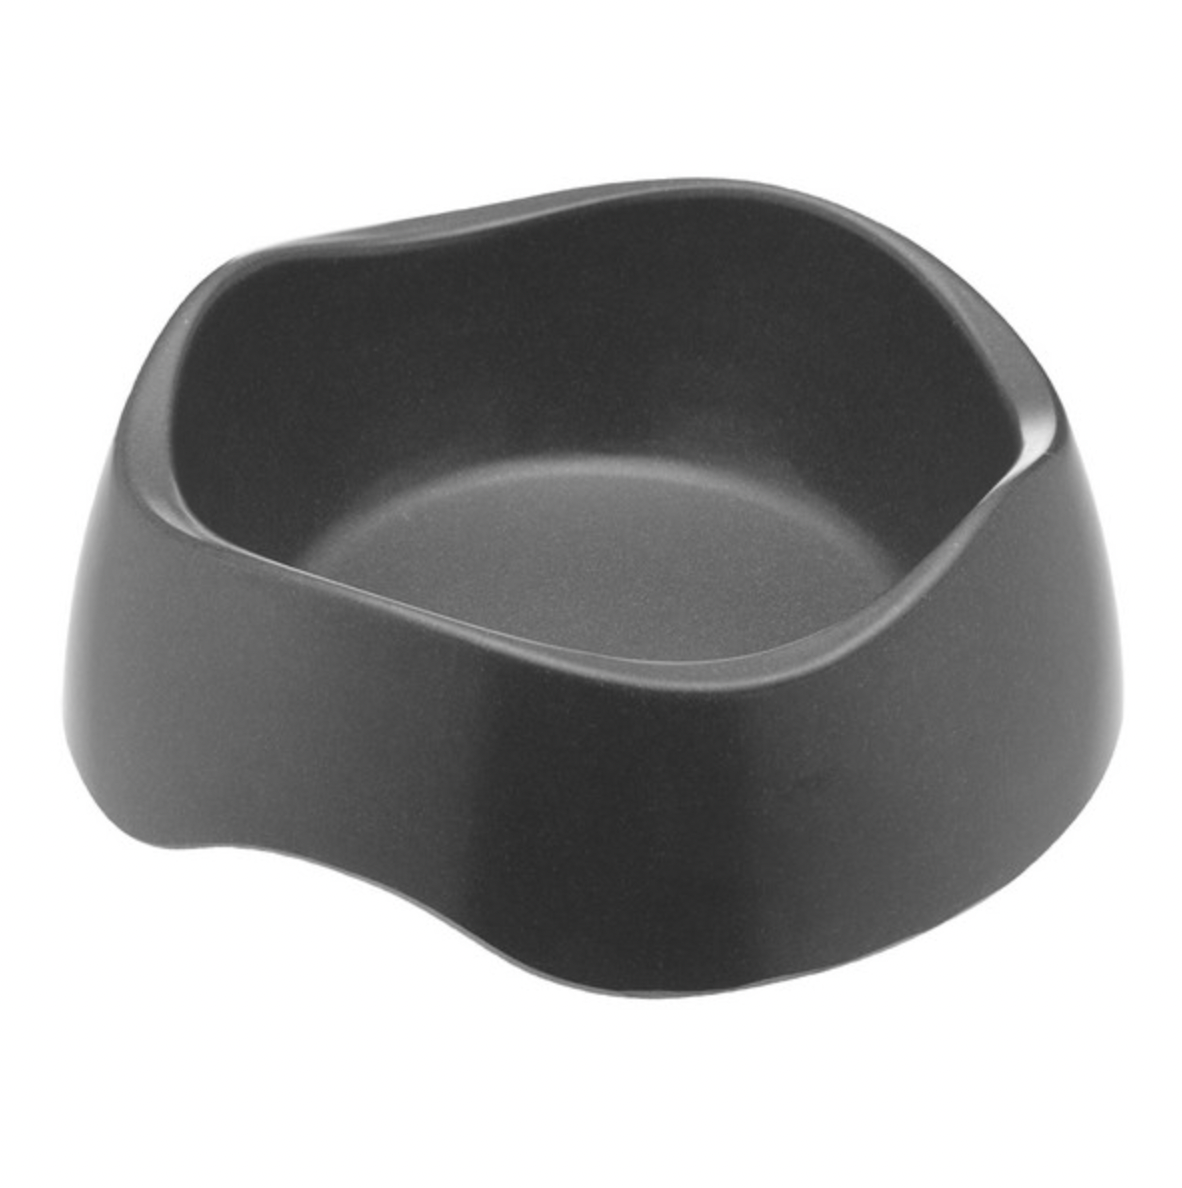 Beco Food and Water Bowl (Grey)